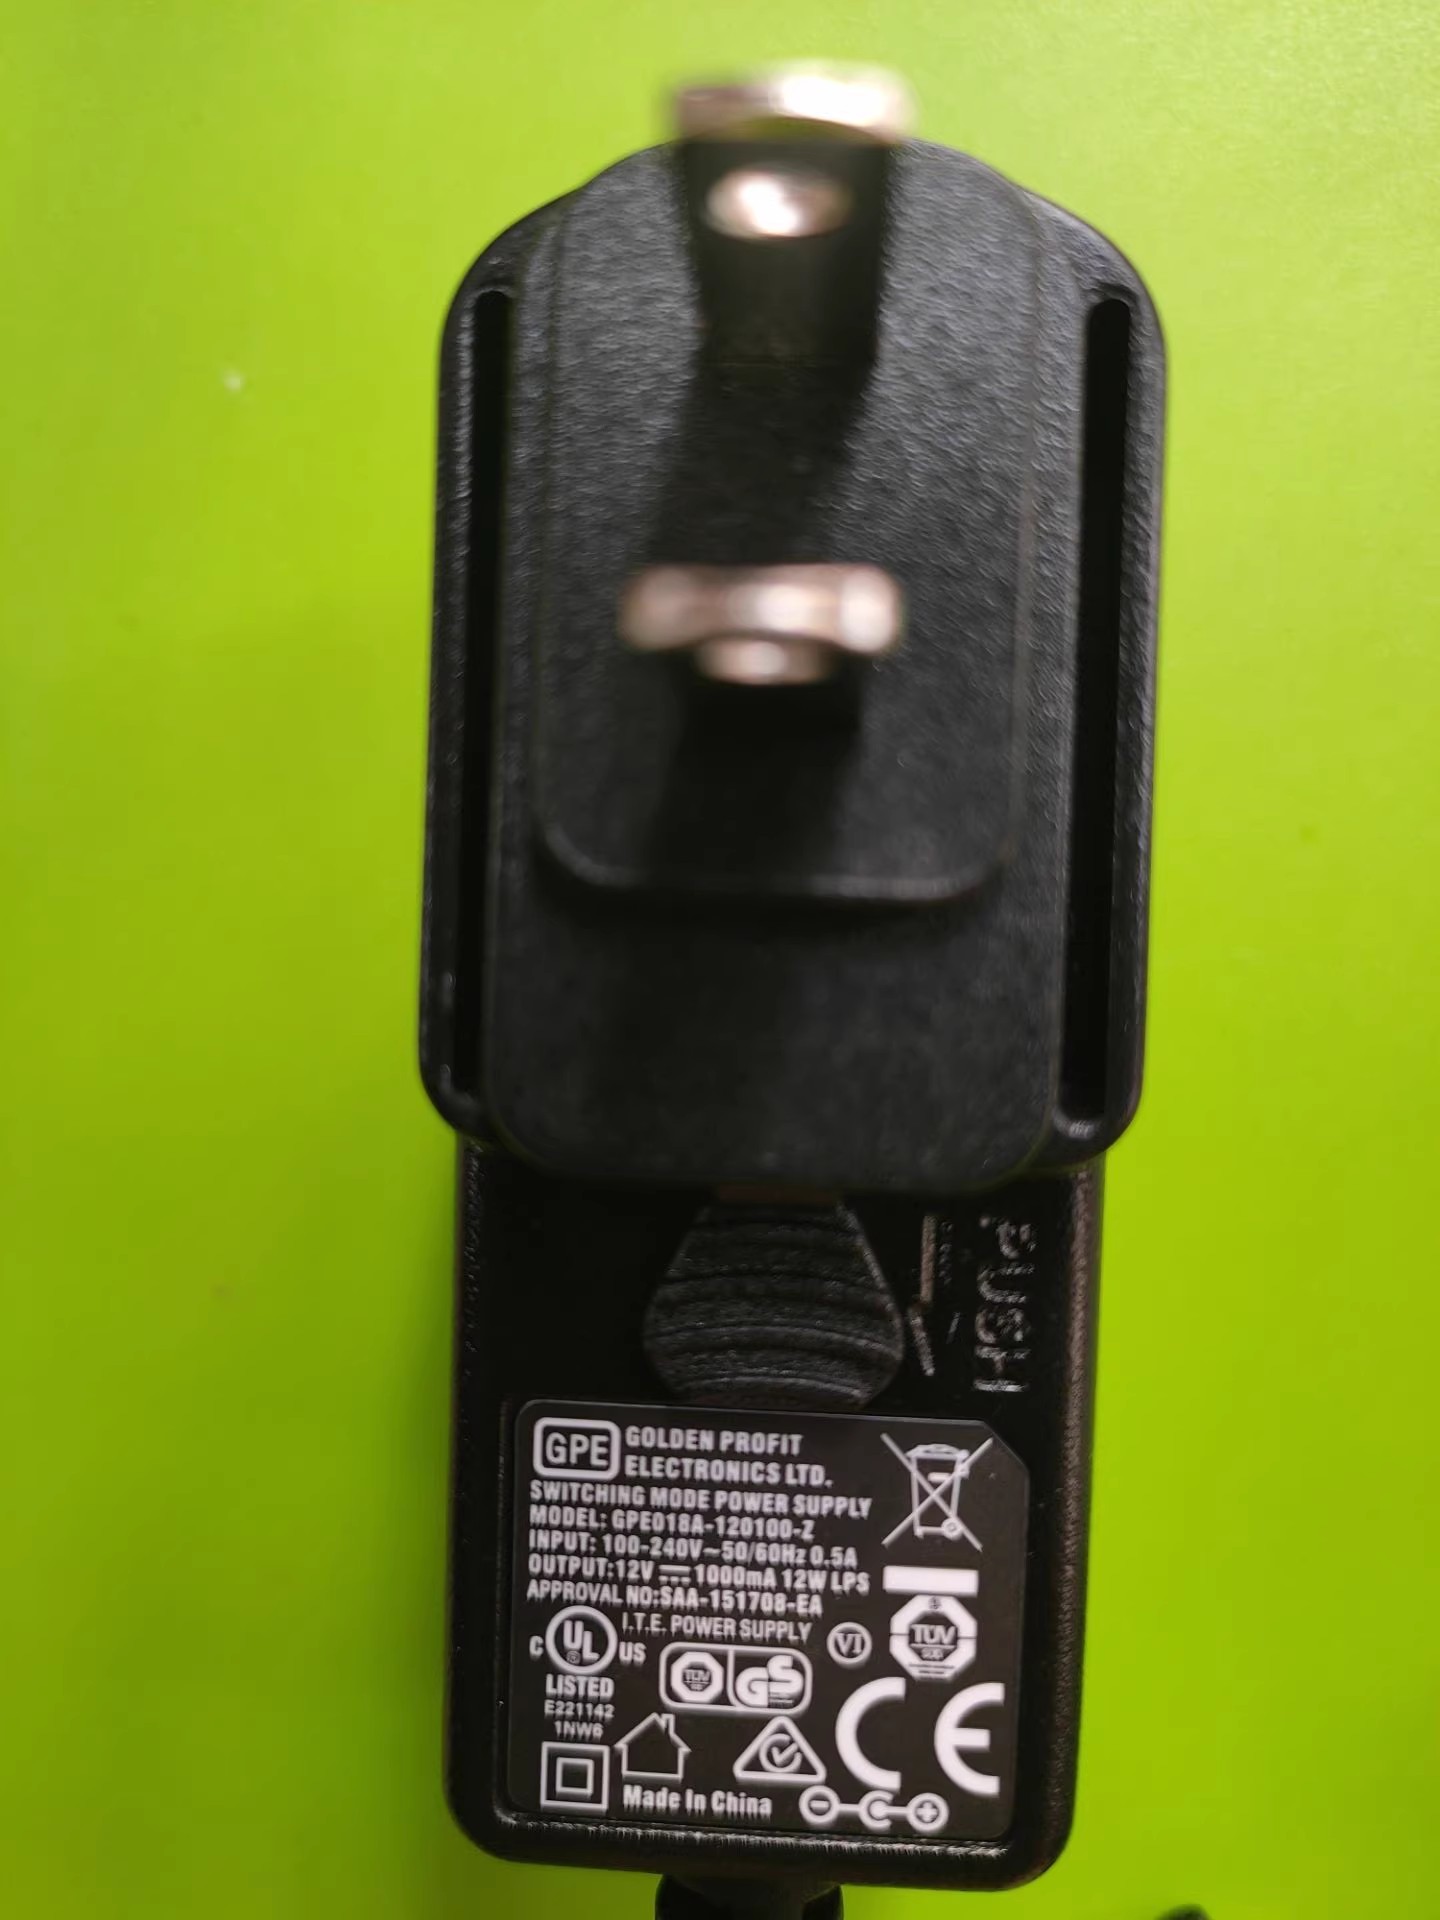 *Brand NEW*GPE 12V 1A AC DC ADAPTHE GPE018A-120100-Z POWER Supply - Click Image to Close